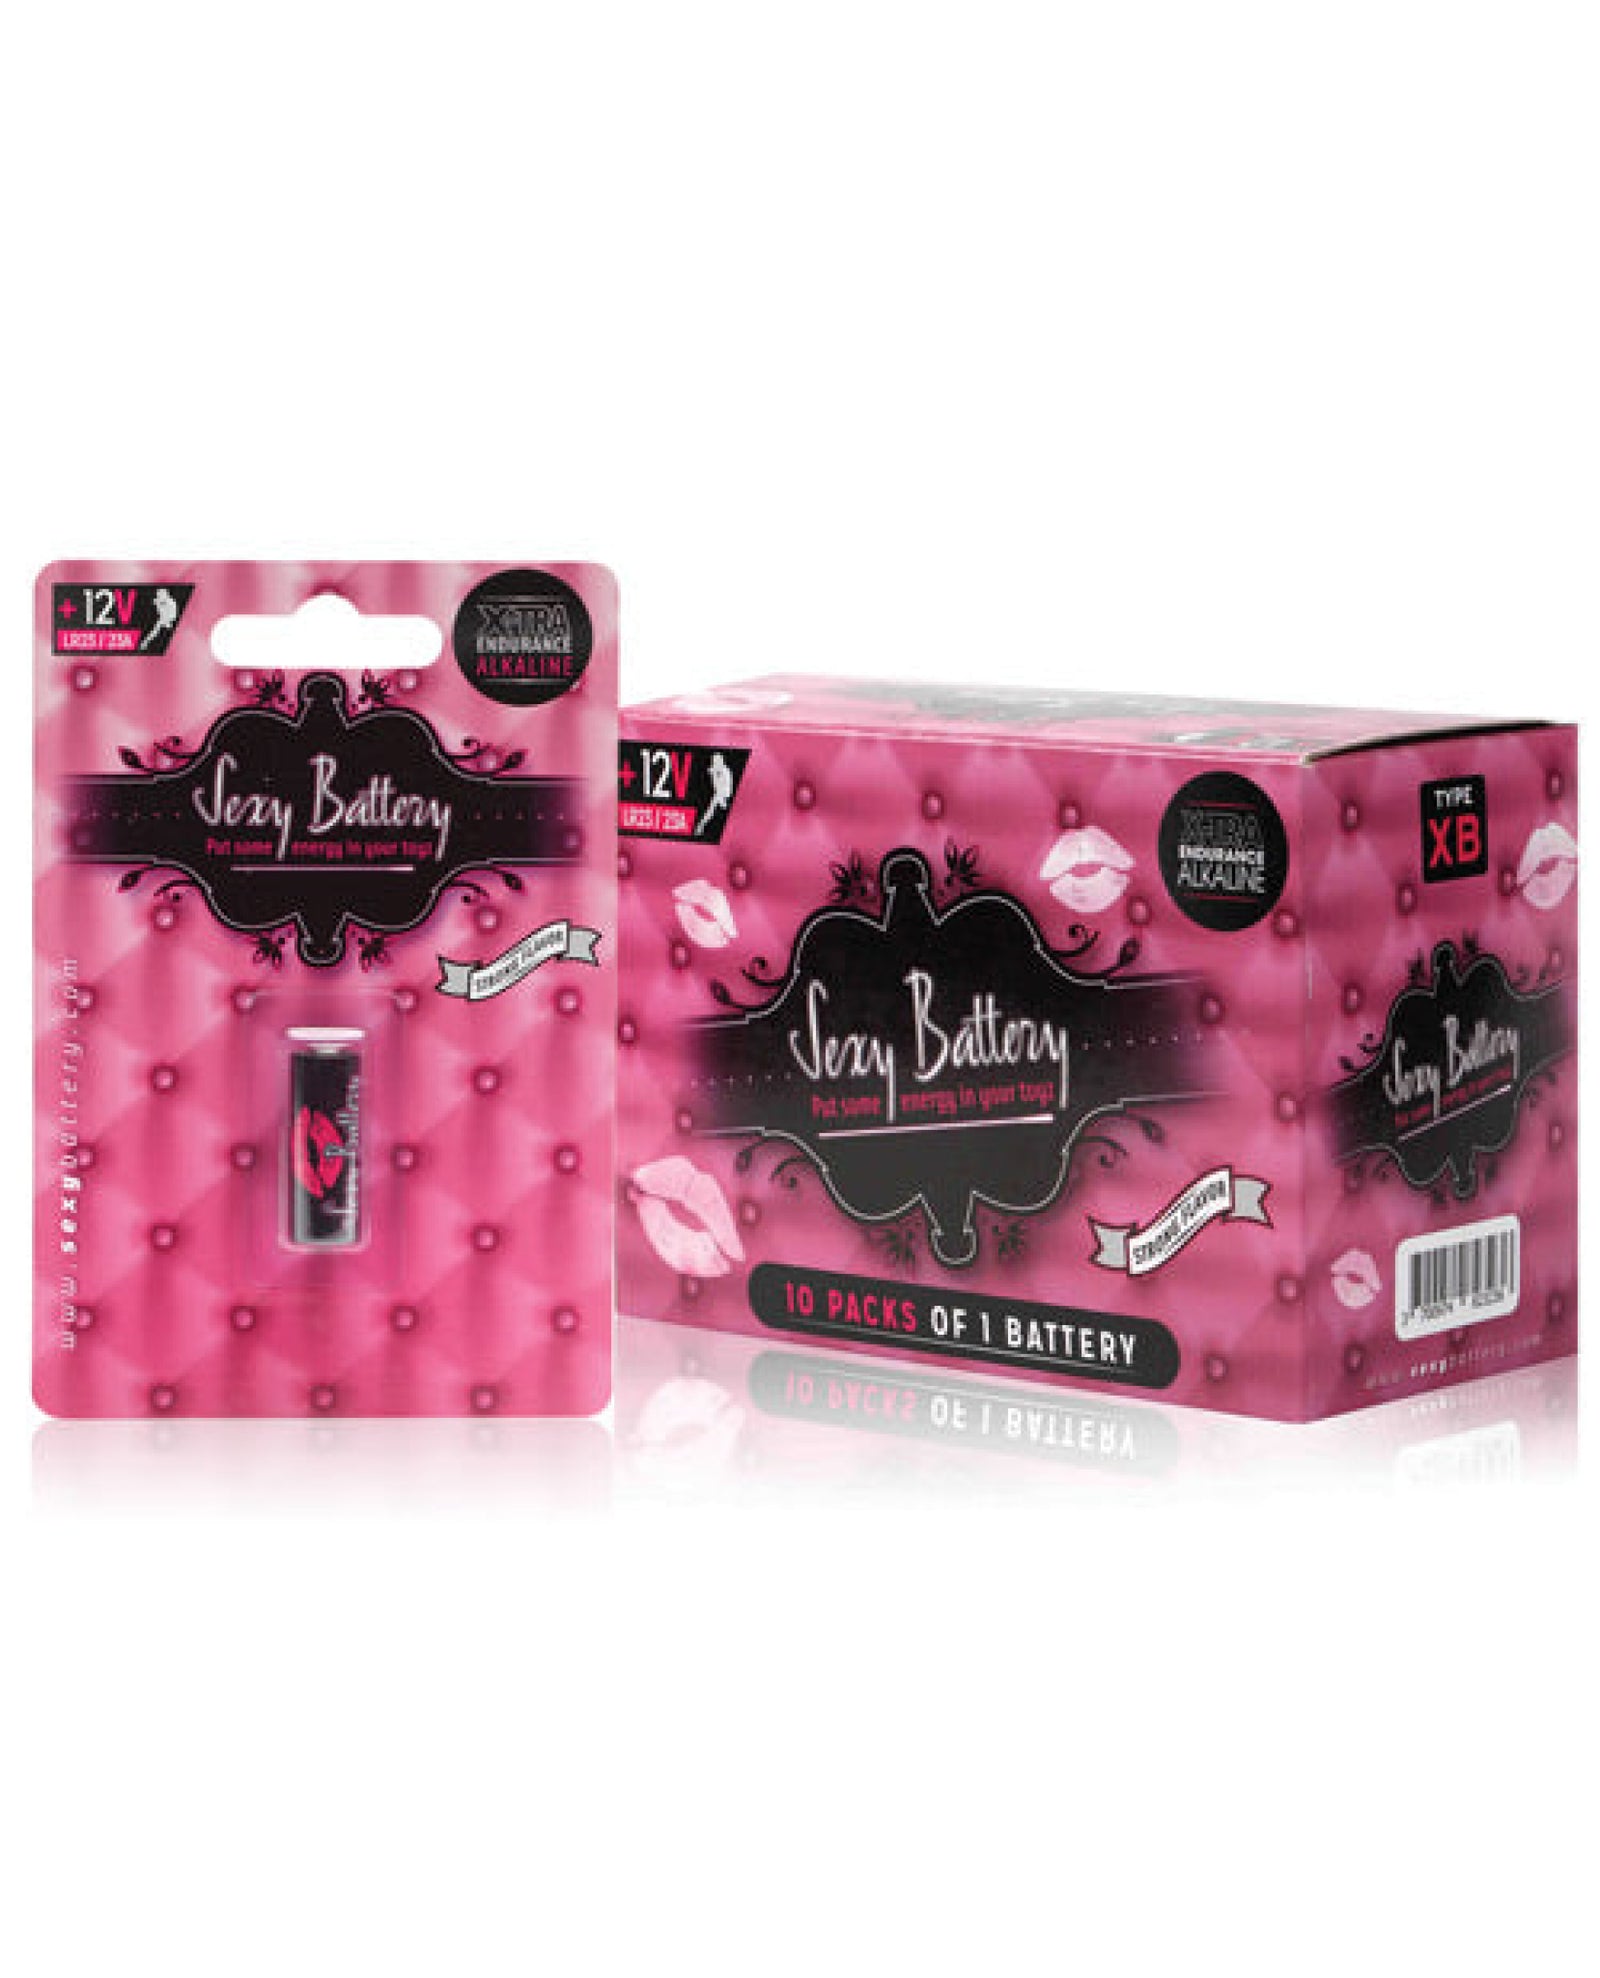 Sexy Battery Lr23 - Box Of 10 Sexy Battery